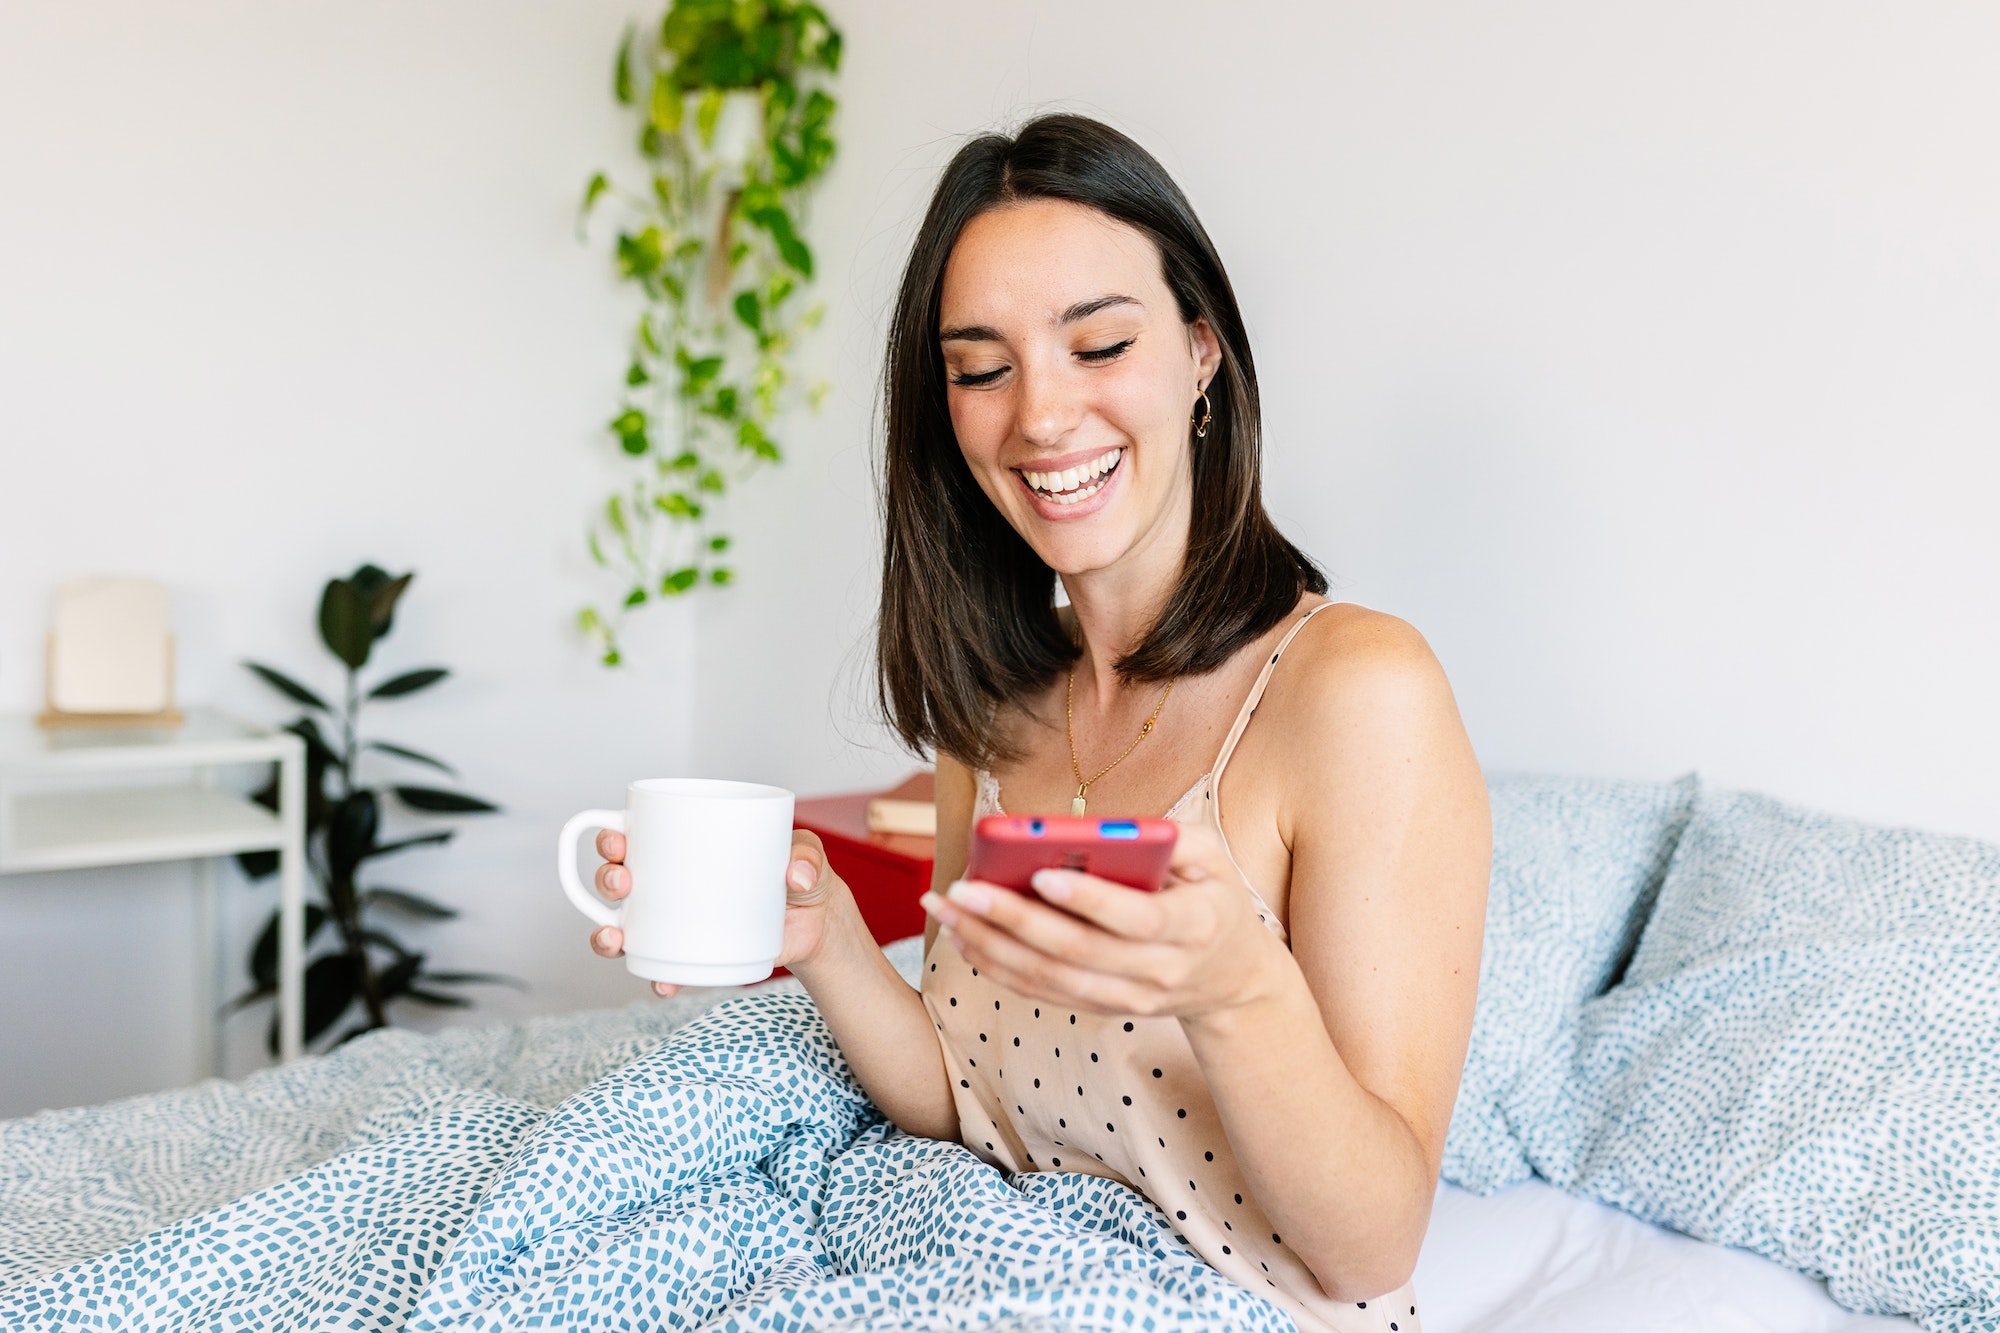 Young happy woman having fun watching social media content on phone app